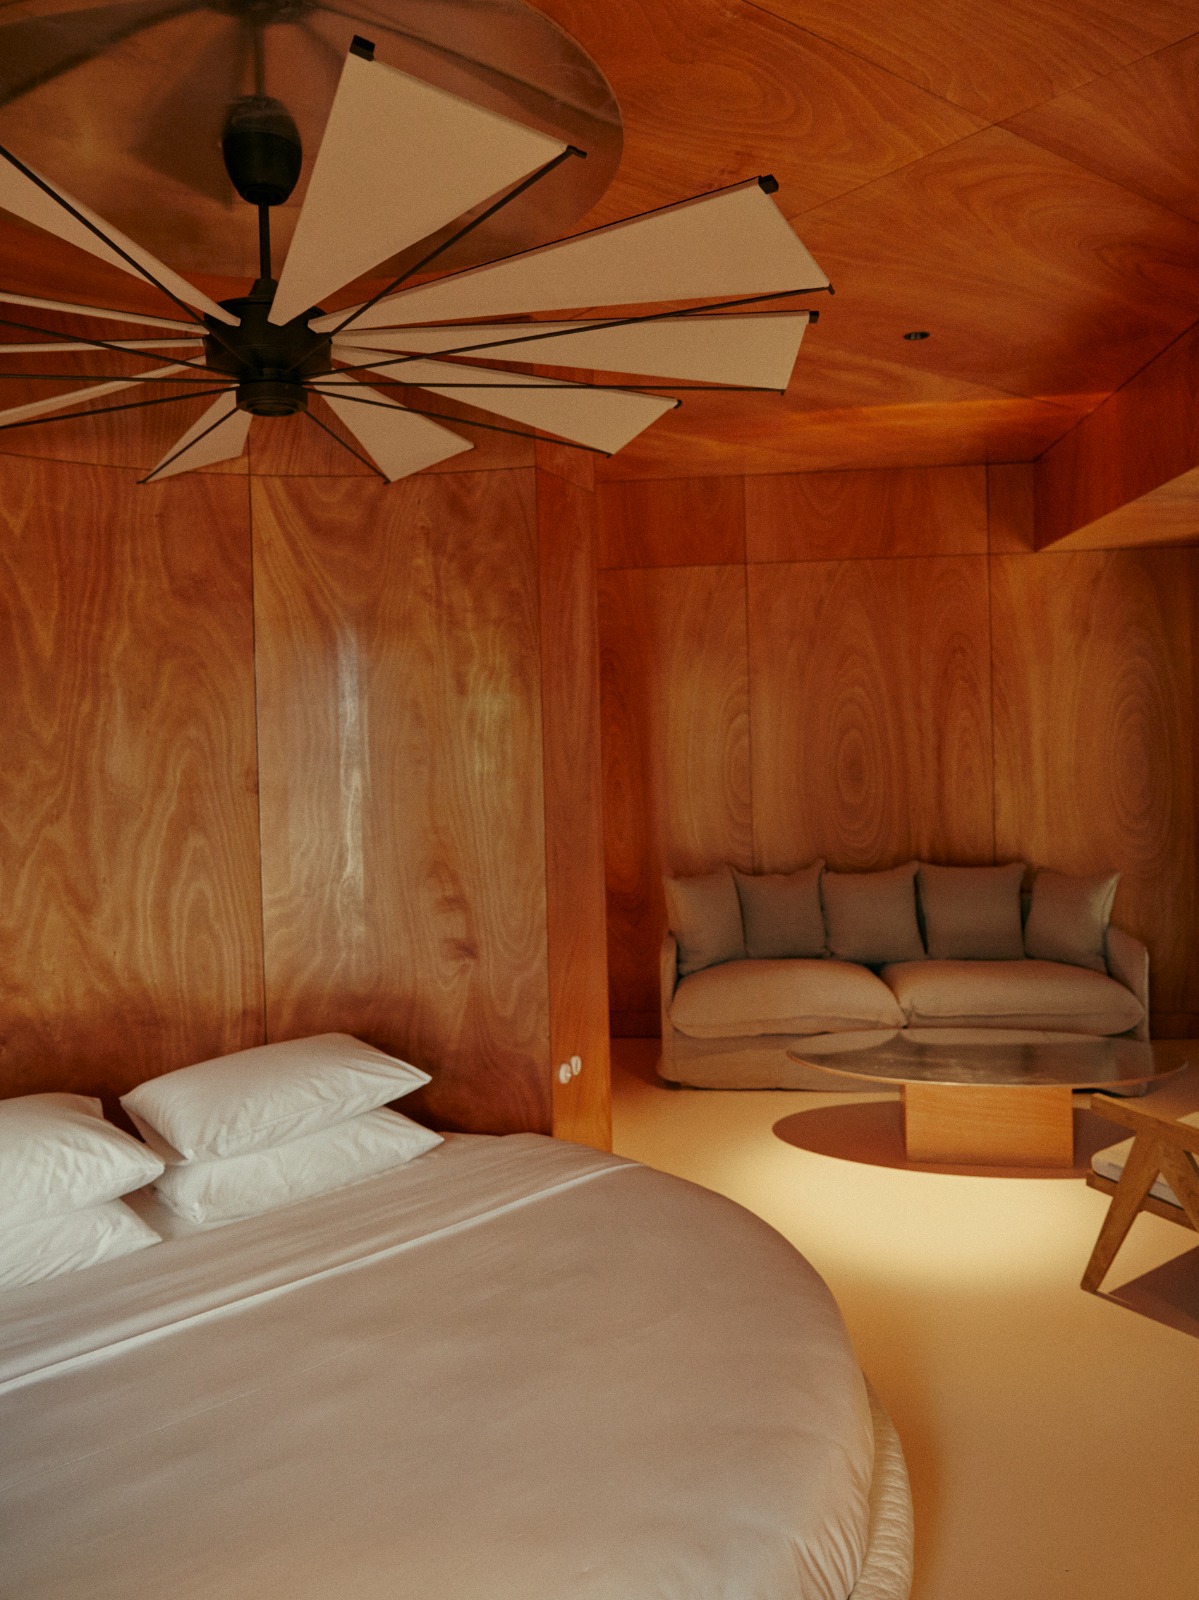 round bed below ceiling fan in guestroom with wood panelled walls